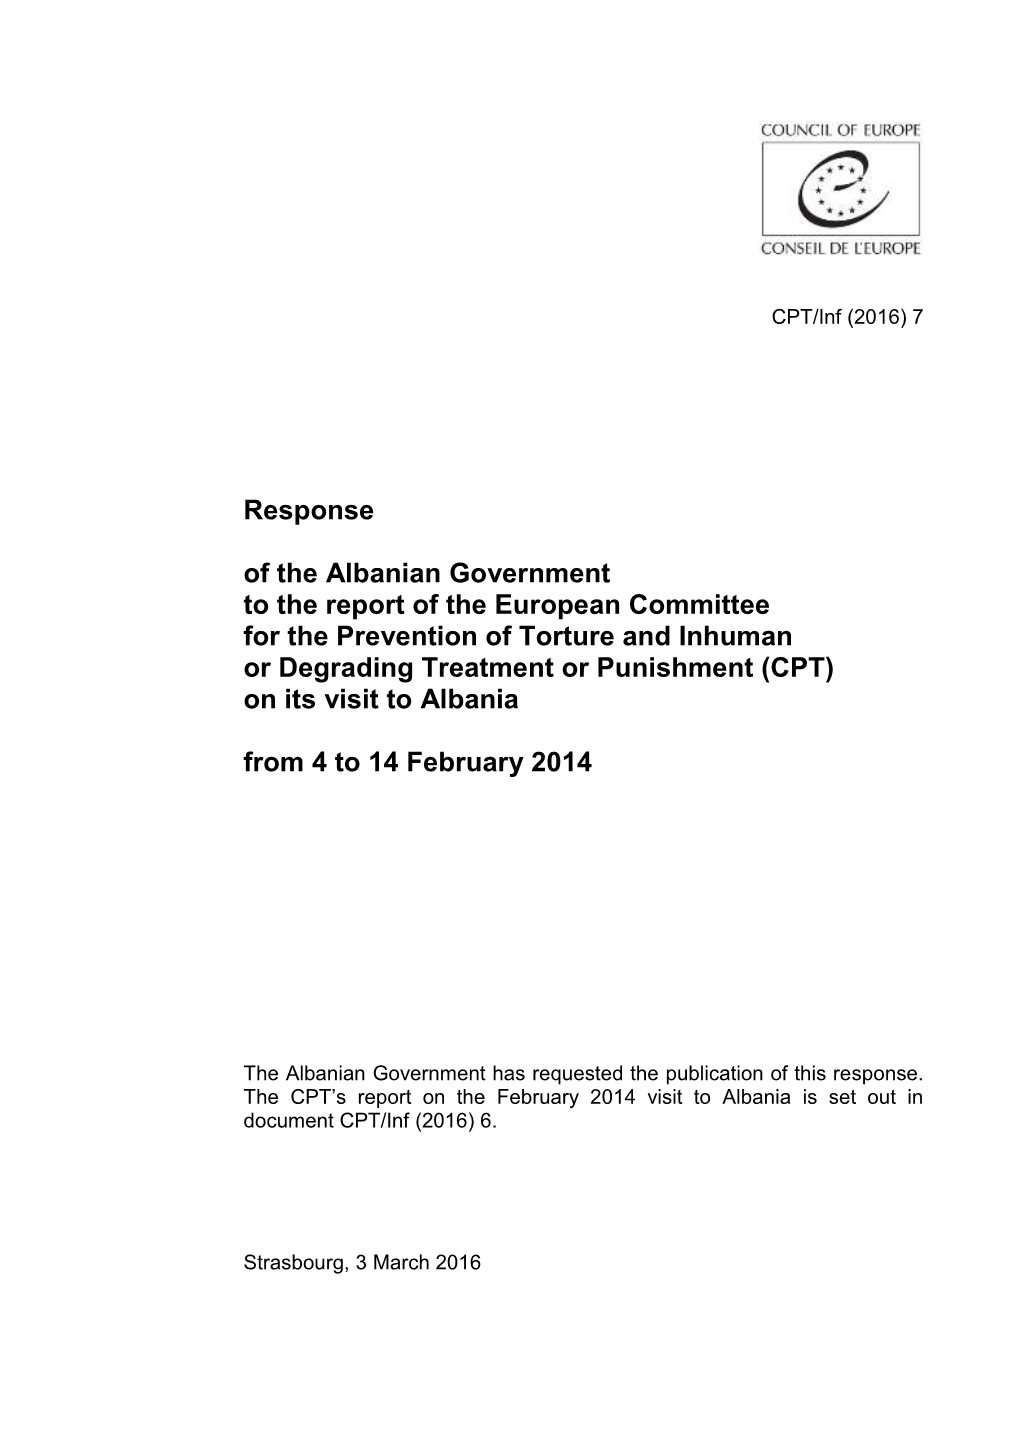 Response of the Albanian Government to the Report of The